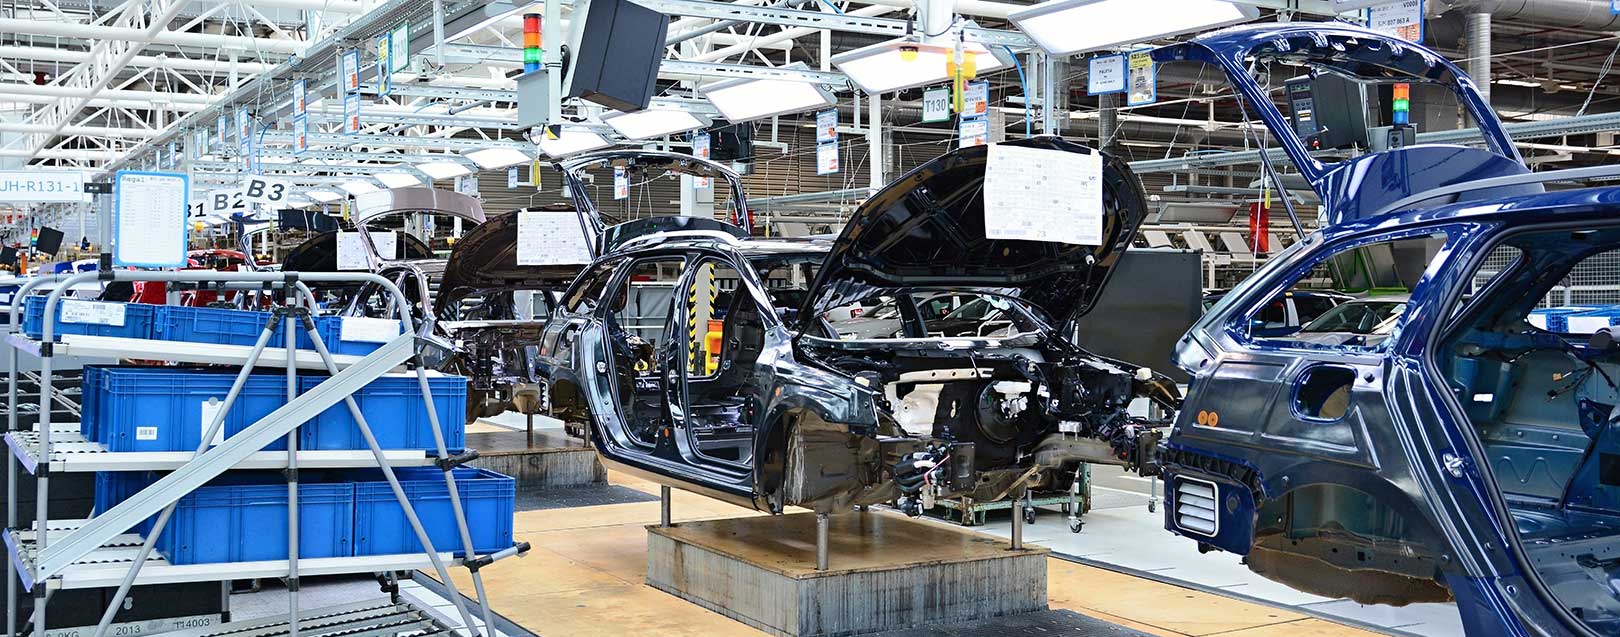 The auto component industry is an export-competitive industry, it exports more than 25% of its production, with the US and EU accounting for 60%.